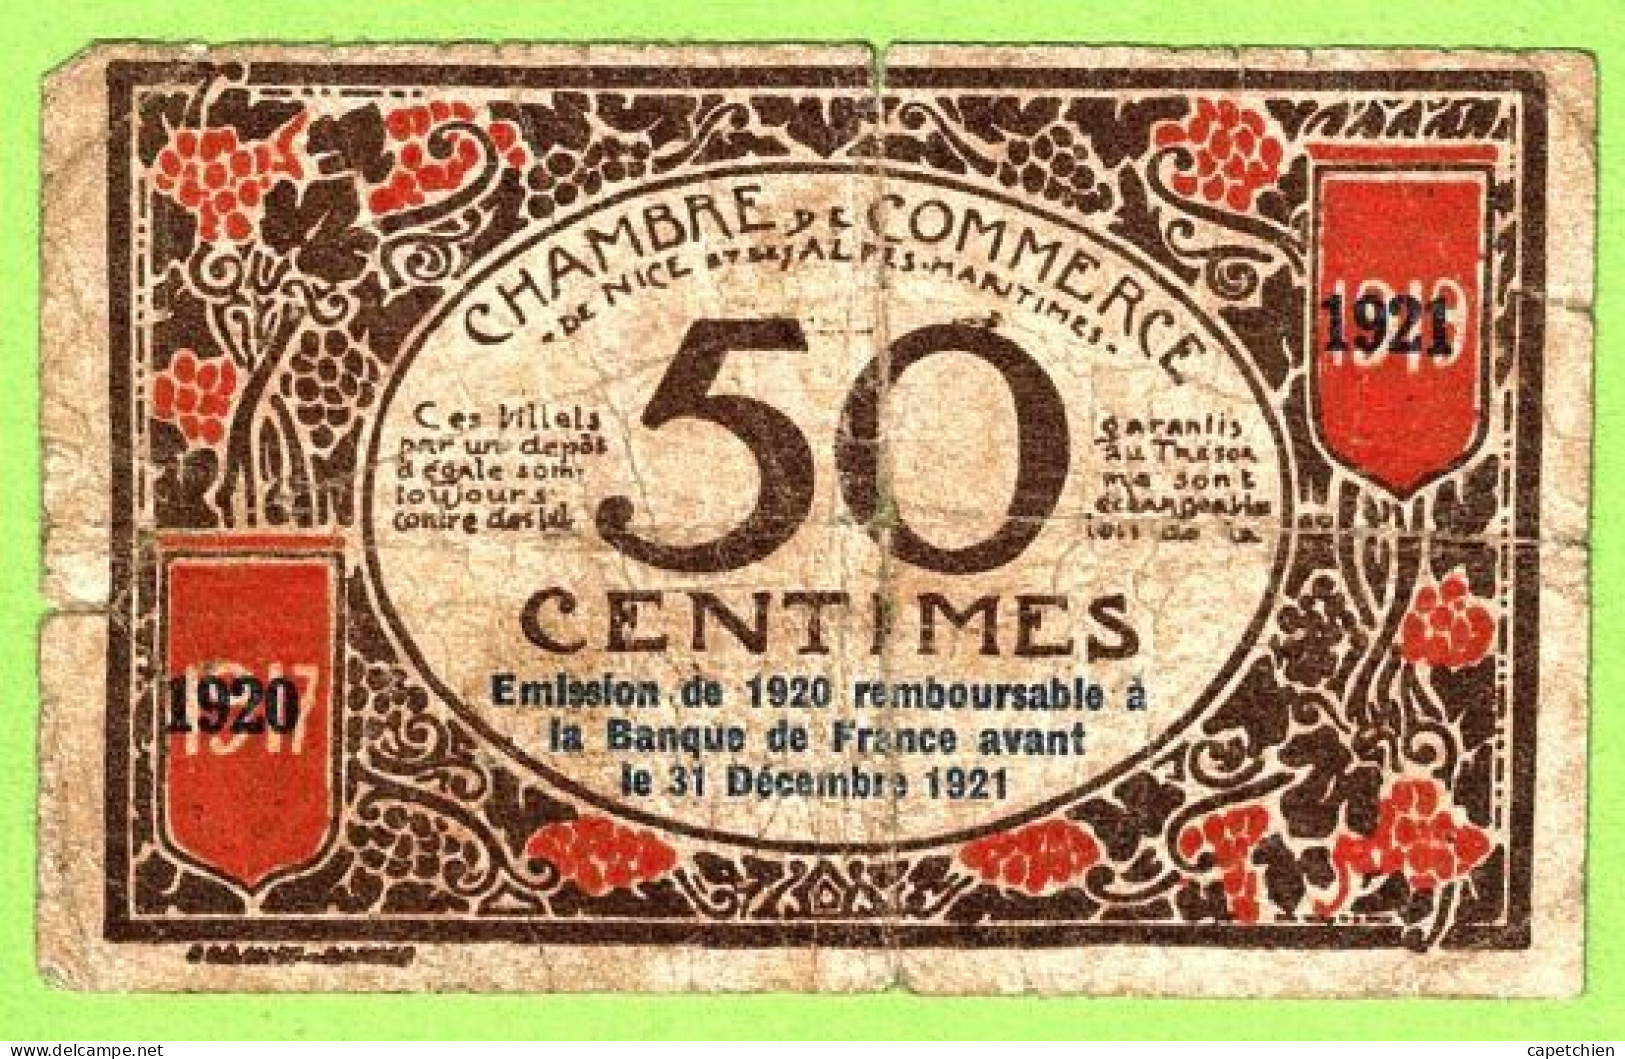 FRANCE / CHAMBRE De COMMERCE / NICE - ALPES MARITIMES / 50 CENTIMES / 1917 - 1921 SURCHARGE 1920 - 1921 / N° 00374 - Chamber Of Commerce